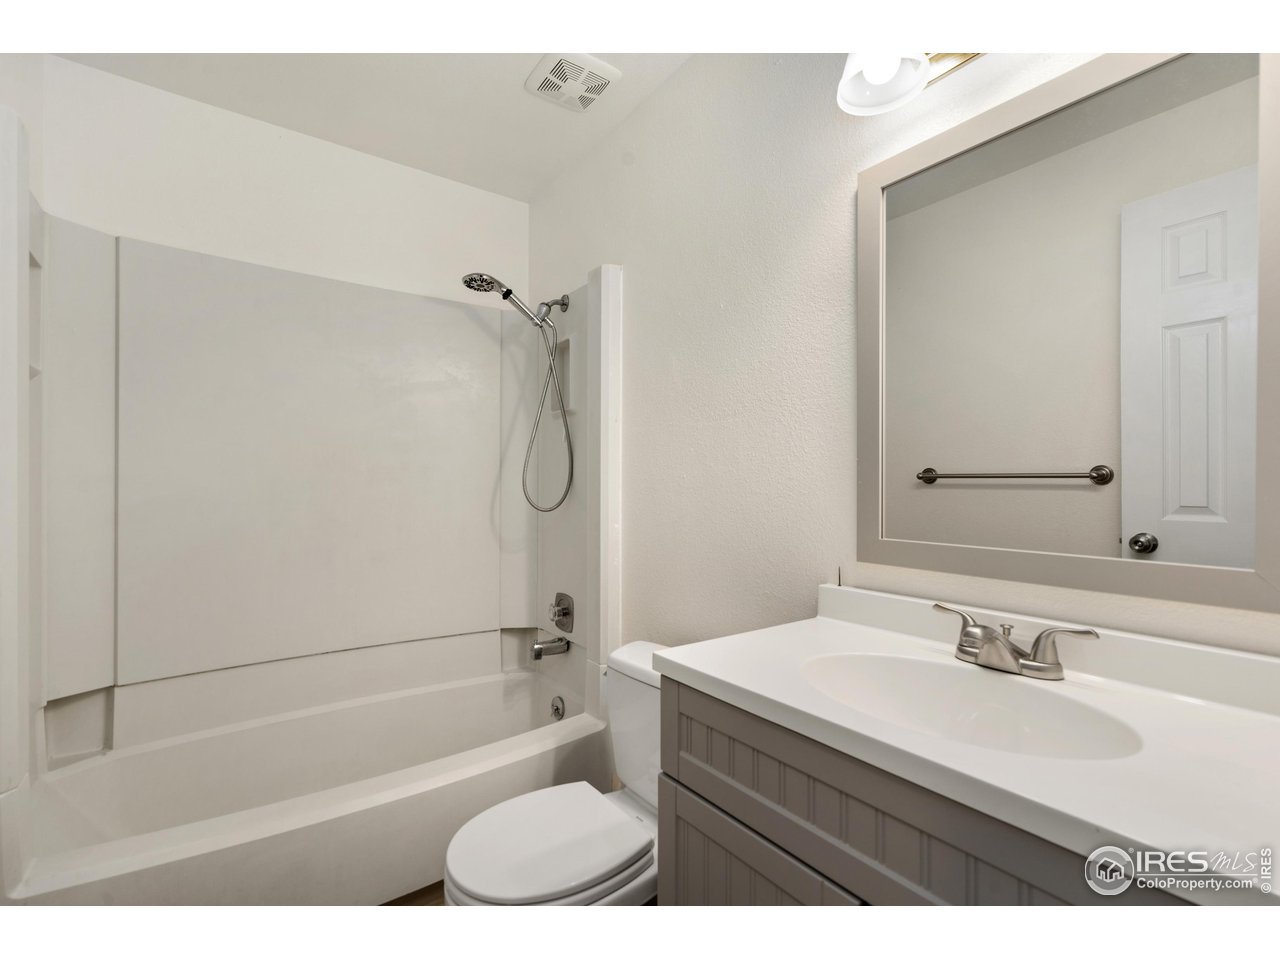 Updated bath with tub/shower combo on lower level